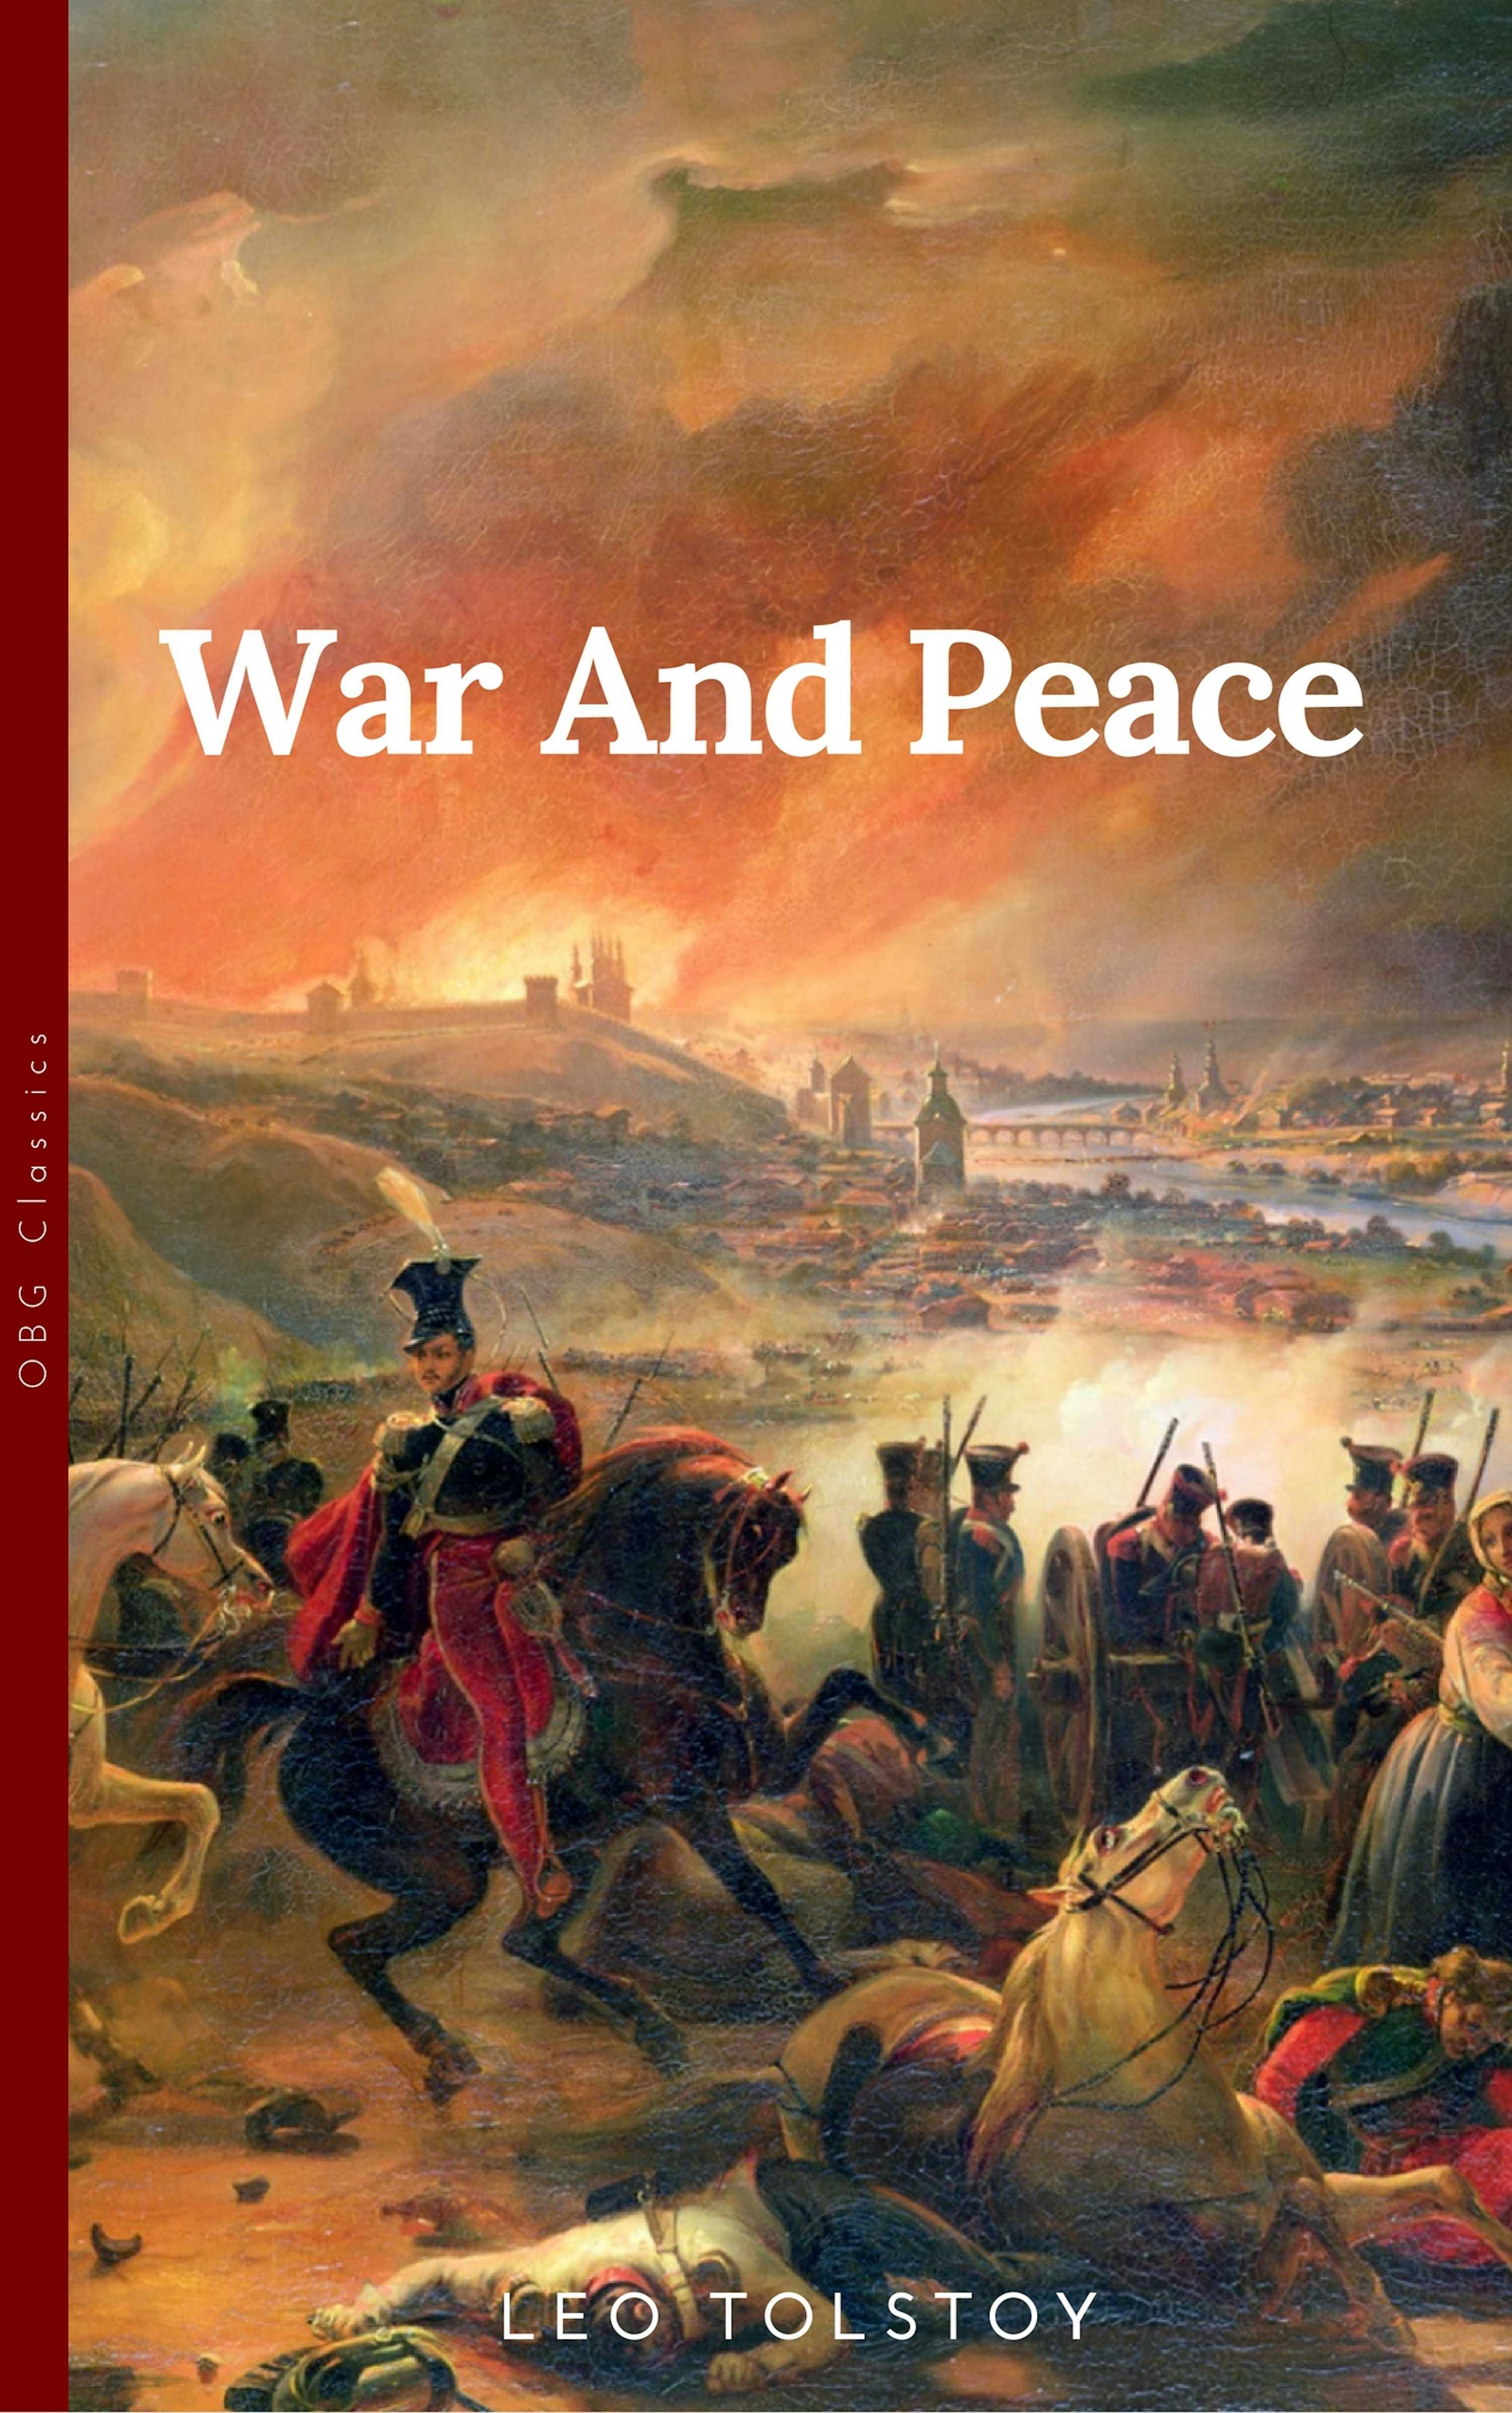 War and Peace by - Graf Leo Tolstoy, Aylmer Maude